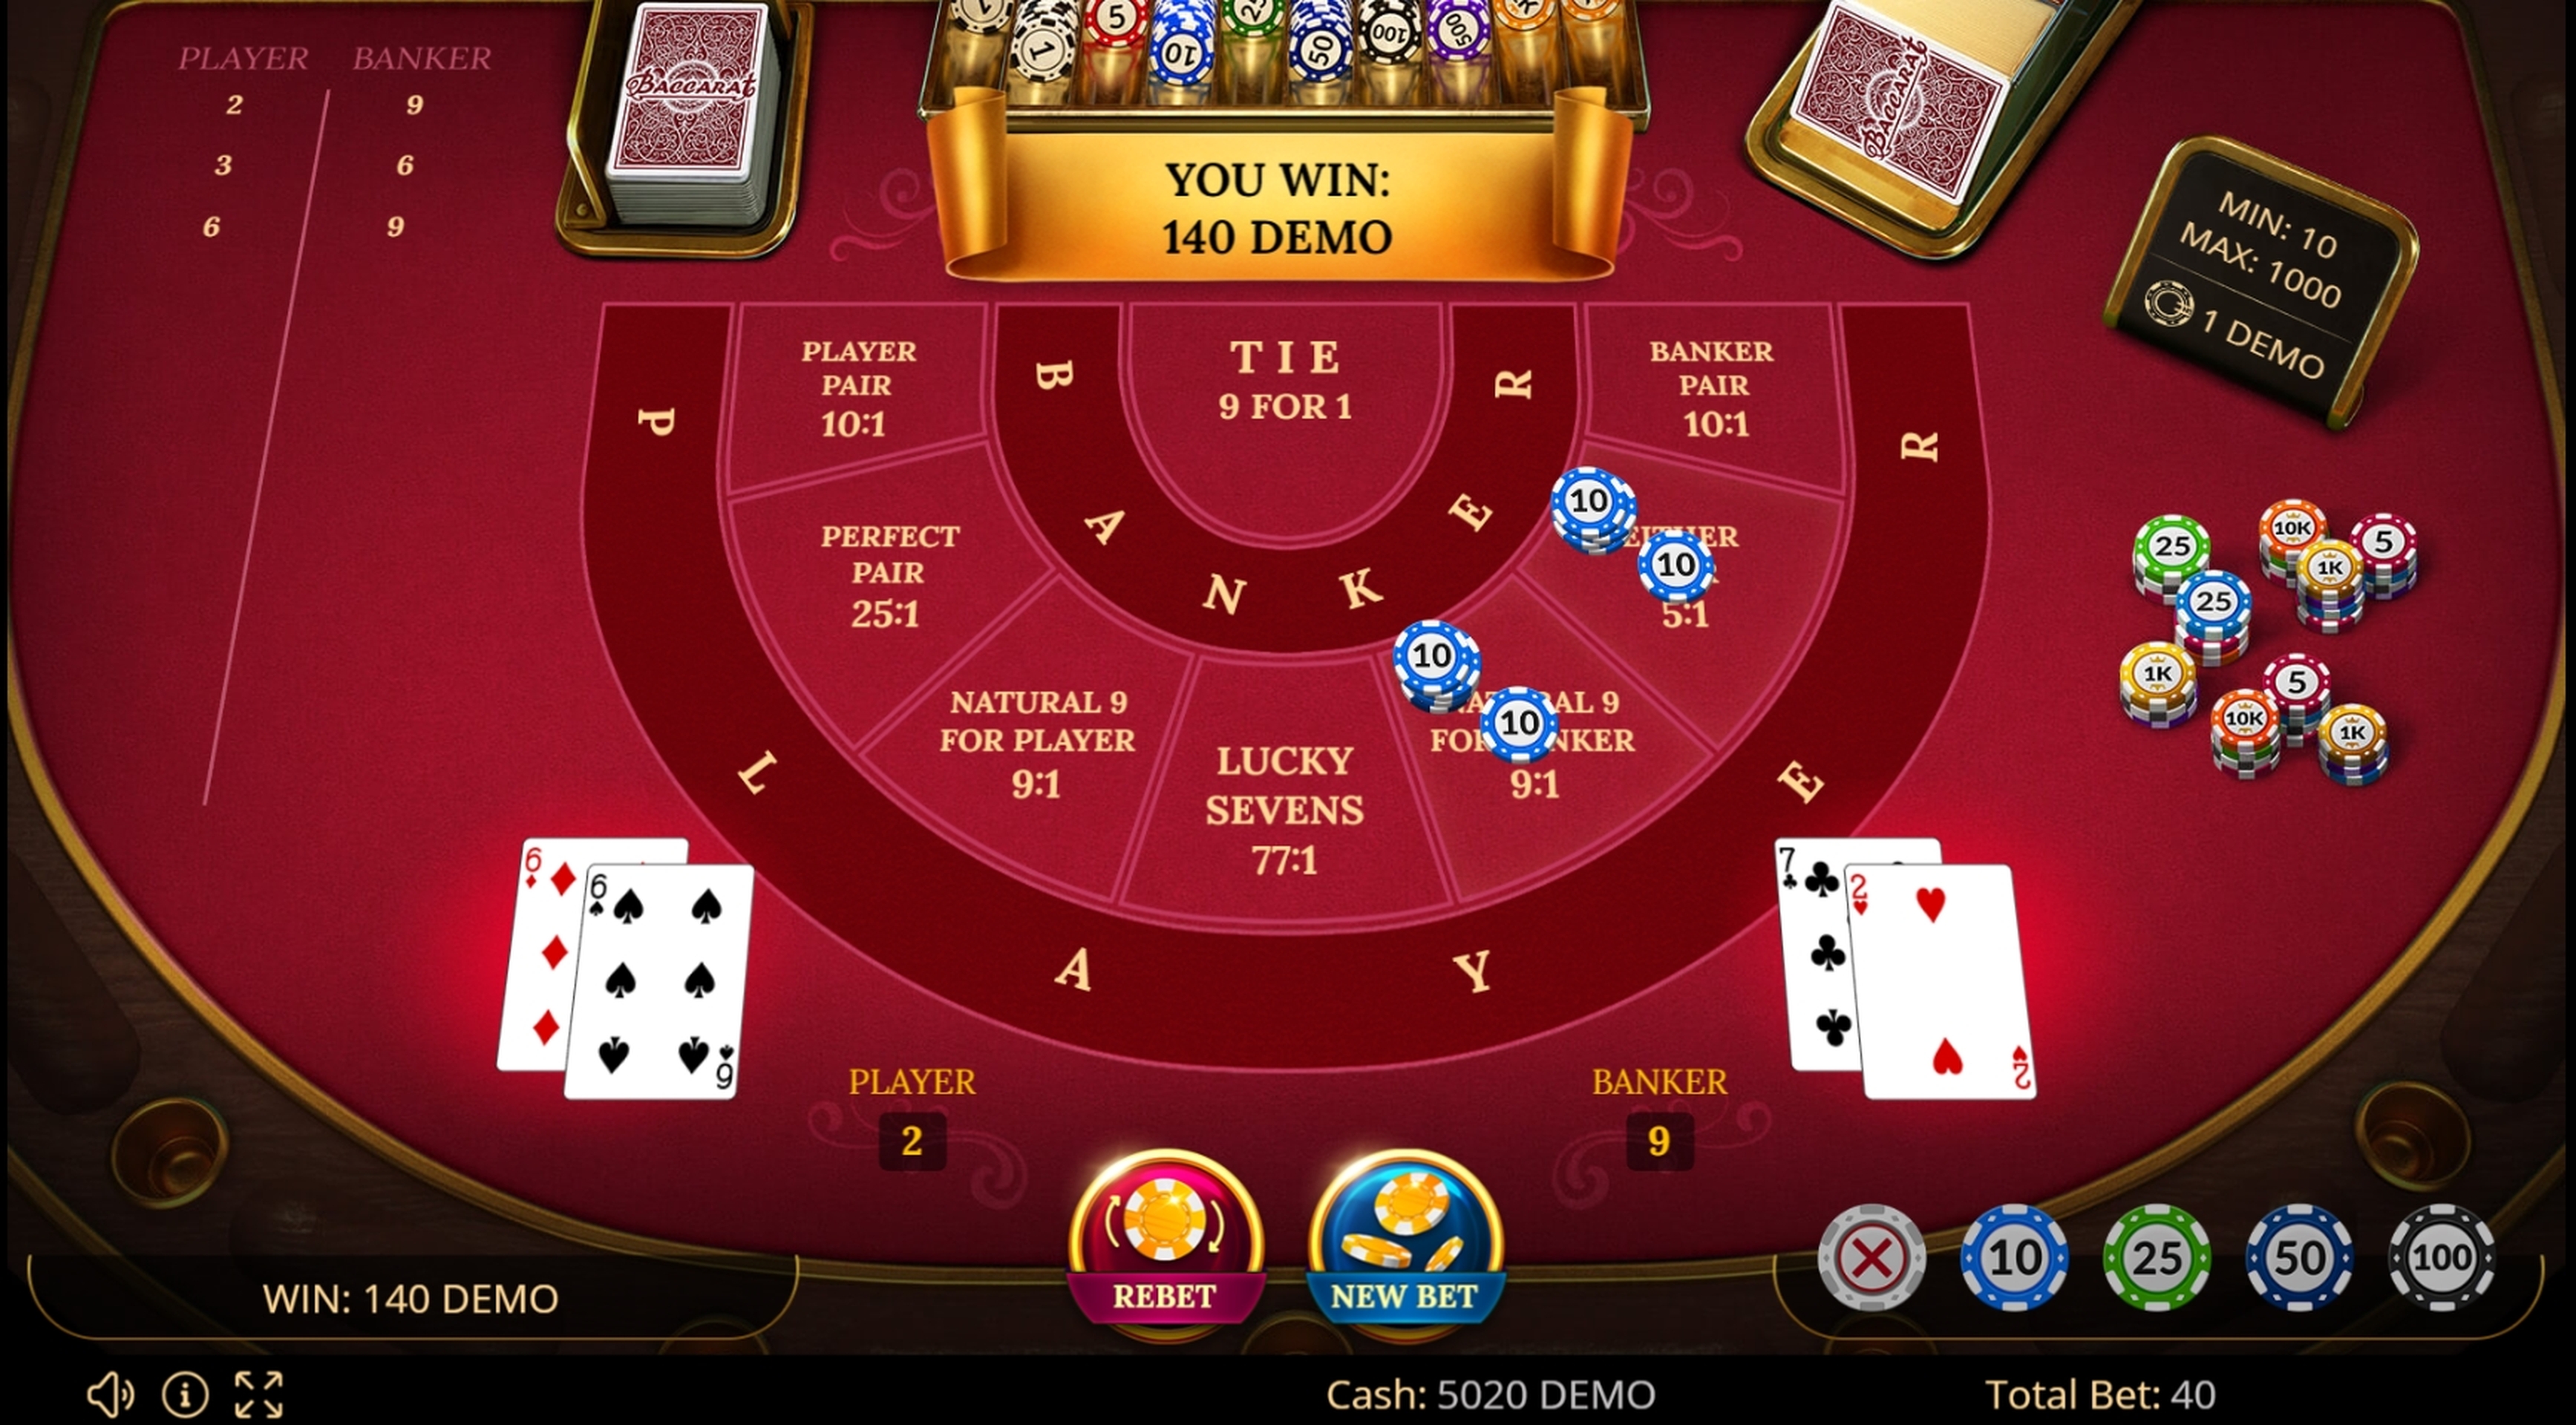 Win Money in Baccarat 777 Free Slot Game by Evoplay Entertainment